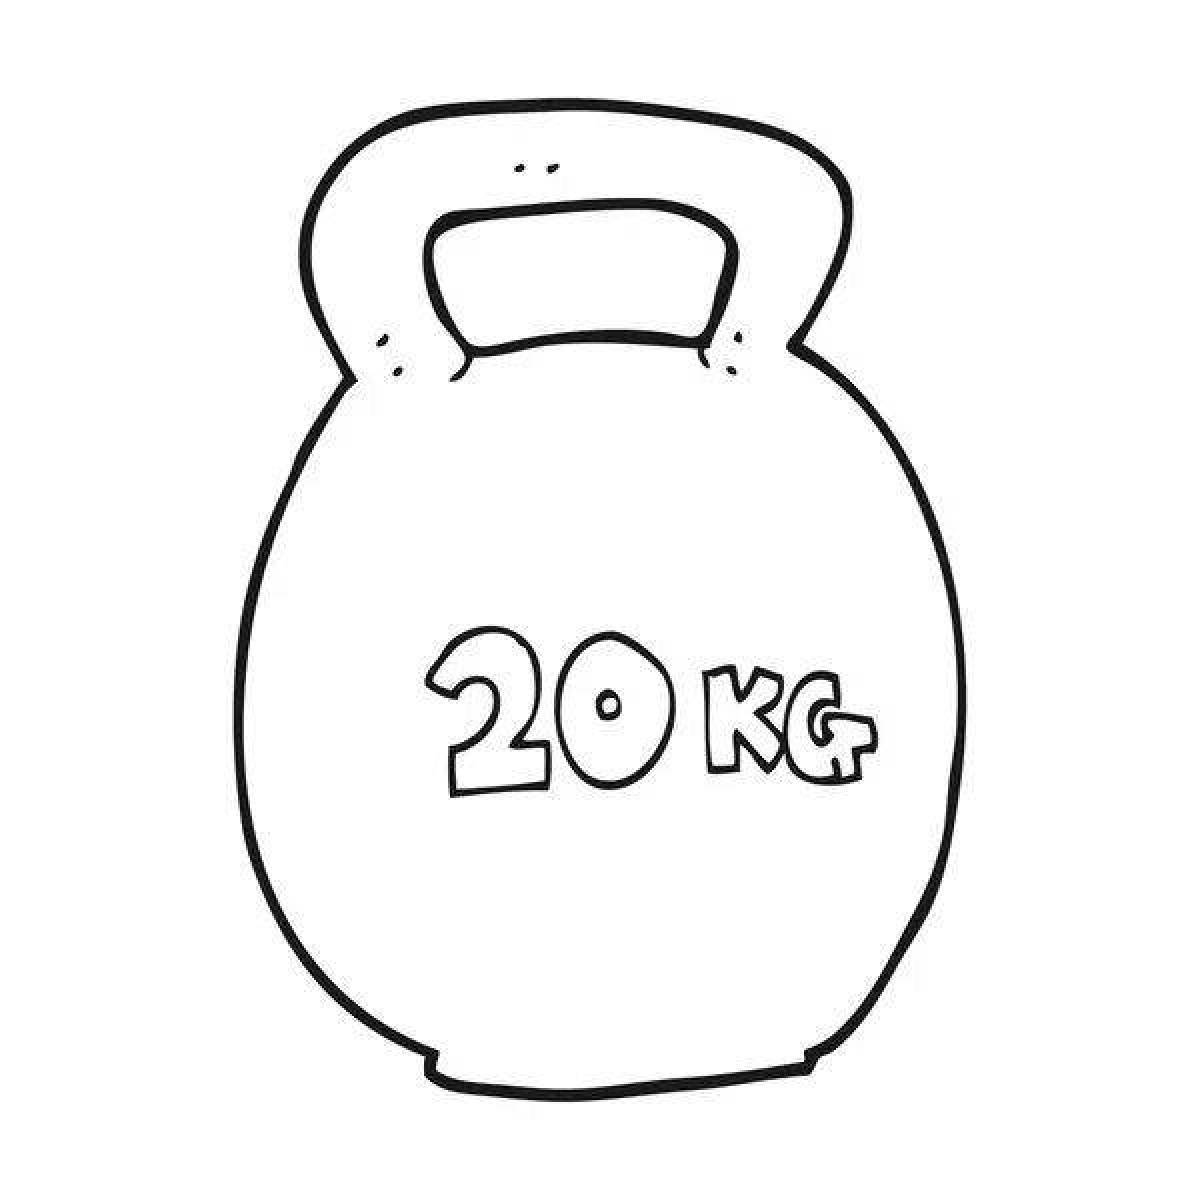 Creative weight coloring page